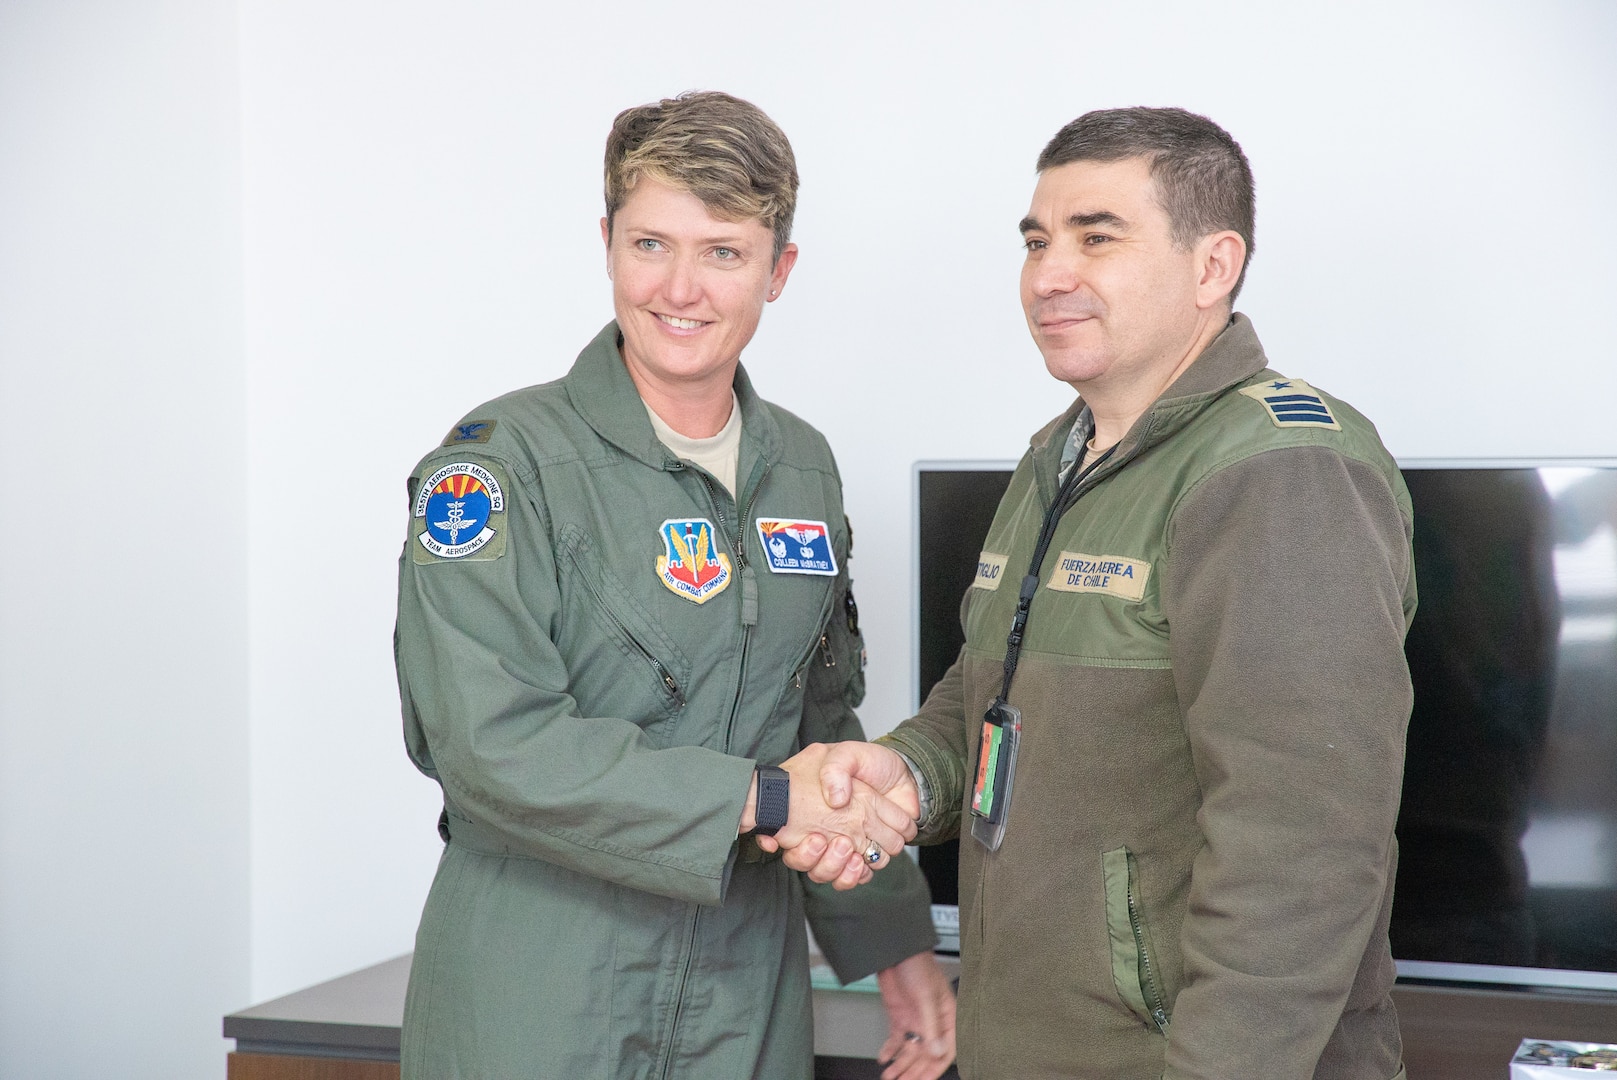 Col. Colleen McBratney, 355th Aerospace Medicine Squadron Commander, Davis-Monthan AFB, Ariz., poses for a photo with Chilean Air Force Commander Claudio Montiglio during a health services administration subject matter expert exchange with the Chilean air rorce at the Hospital Clínico, Santiago, June 4-8. Key U.S. and Chilean air force military health specialists discussed ways to improve medical administration practices, marking the first time this type of exchange has taken place in Chile. (U.S. Air Force photo by Staff Sgt. Danny Rangel)